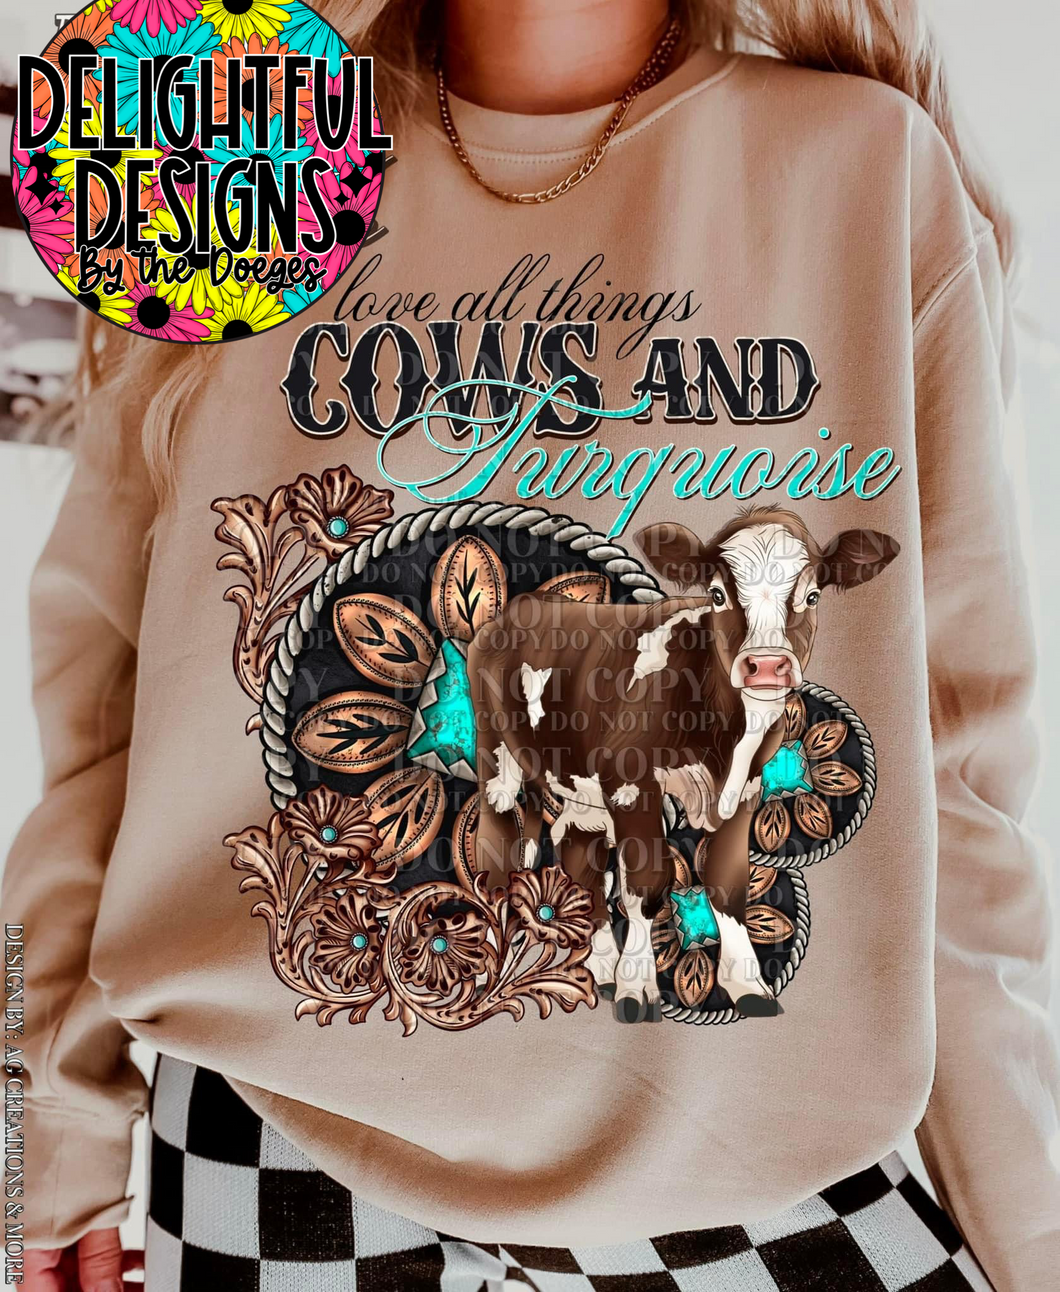 Love all things cows and turquoise